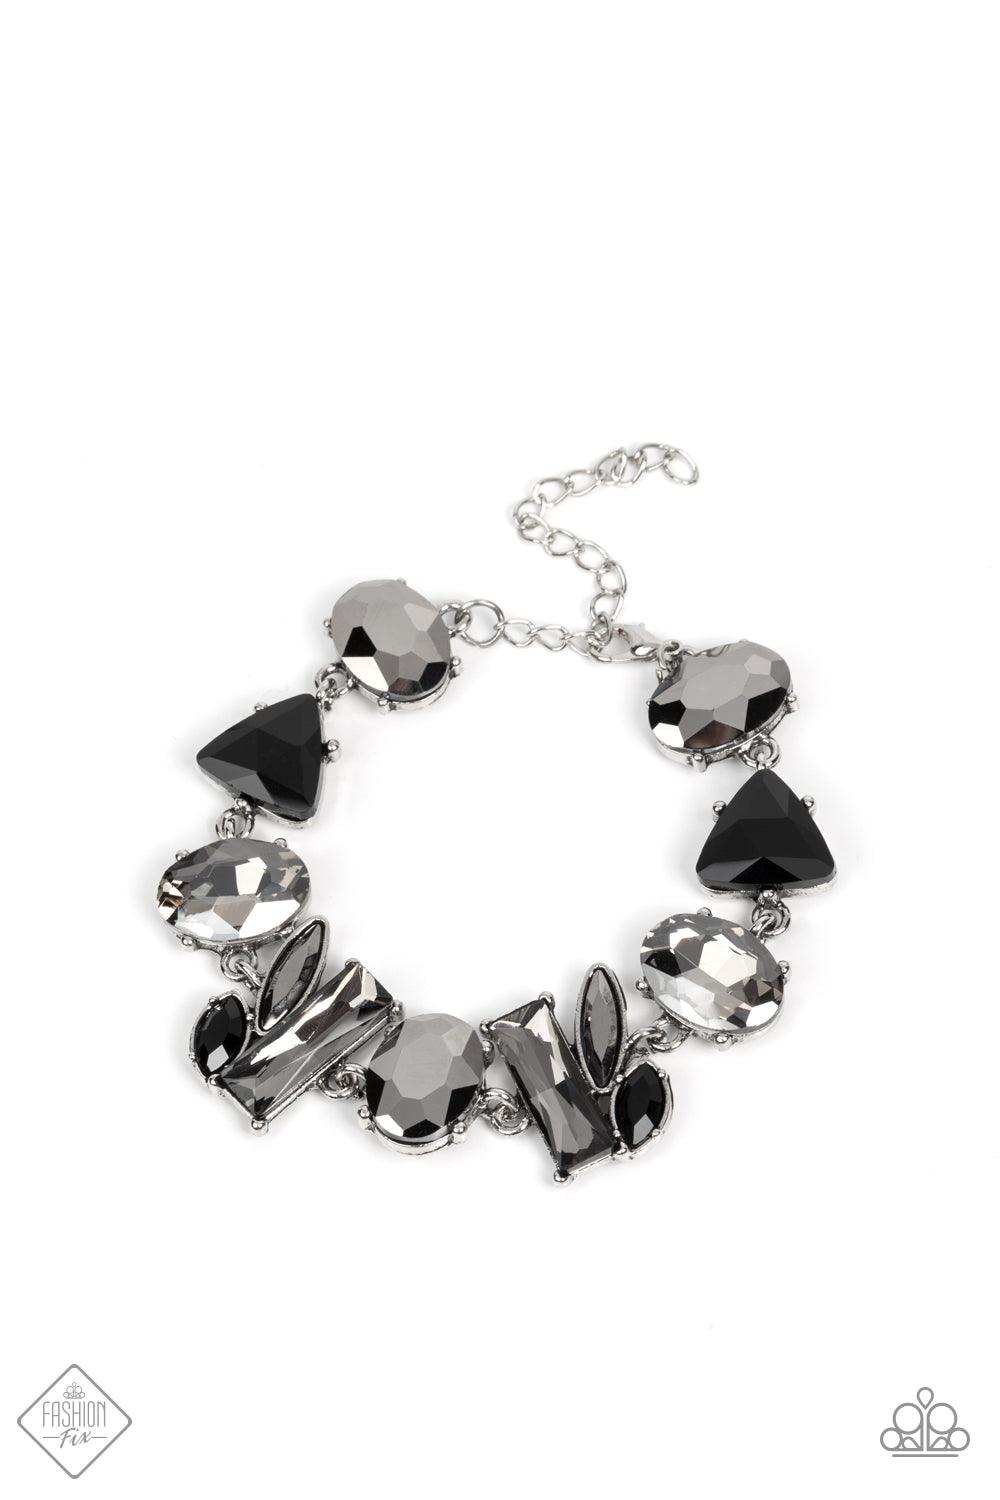 Paparazzi Accessories Marvelously Modish - Silver Featuring edgy pronged settings and antiqued silver frames, a mismatched collection of lustrous hematite, smoky, and black rhinestones in various shapes and sizes unite into a gritty modern mashup around t